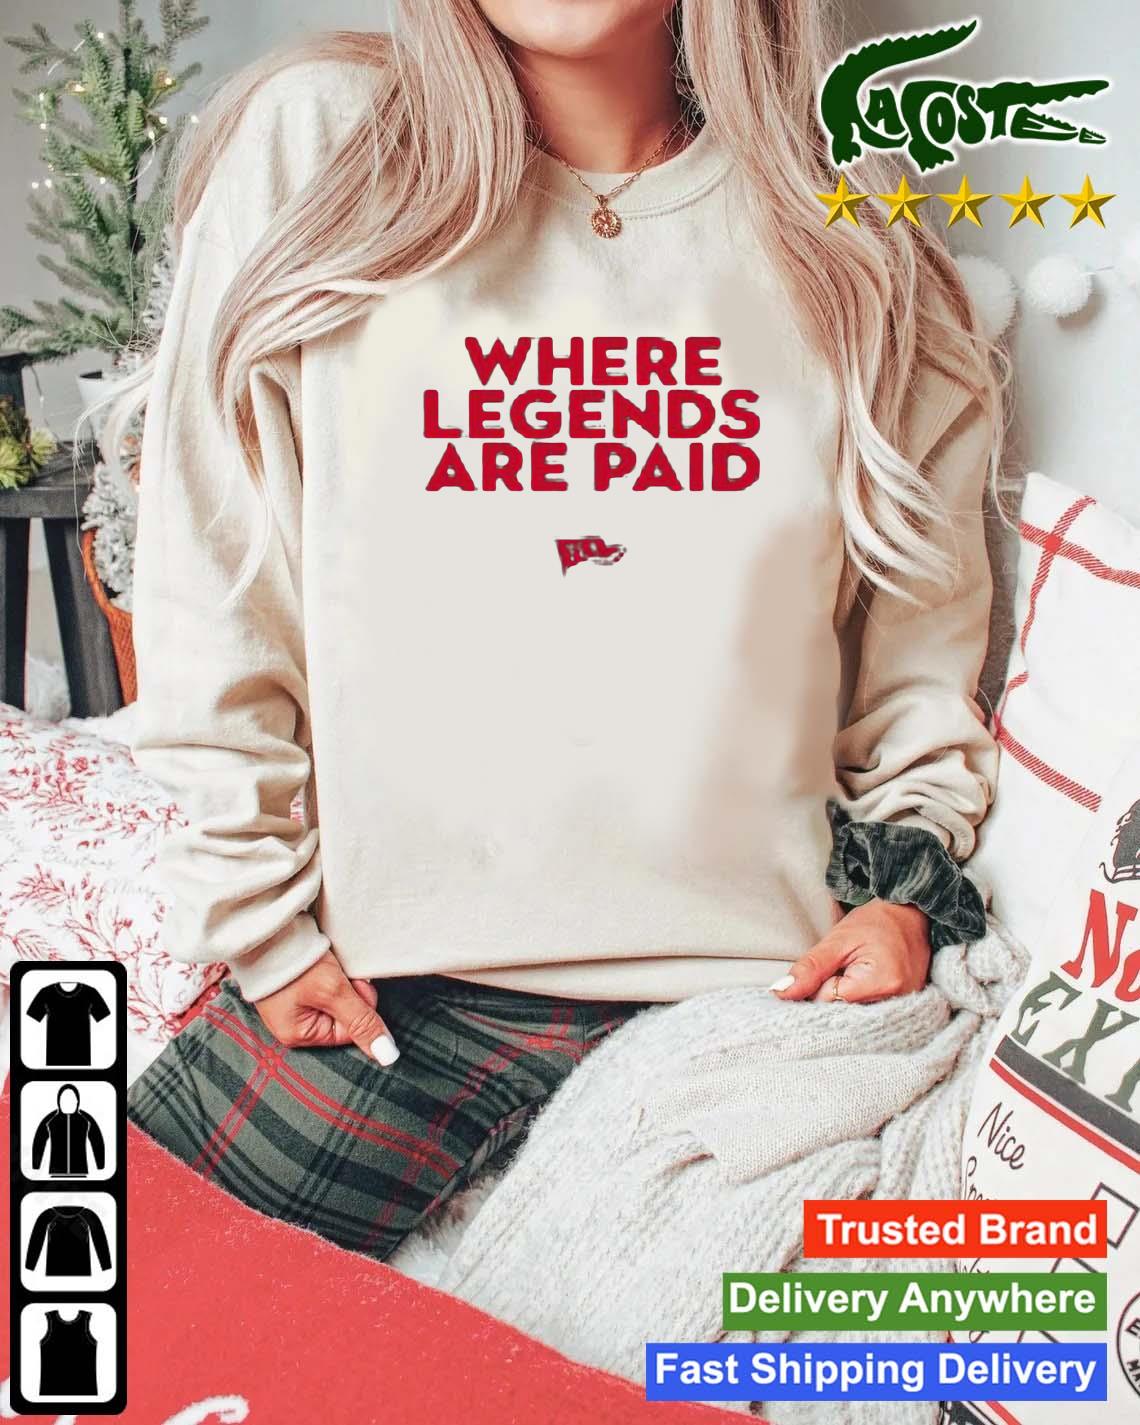 Where Legends Are Paid Sweats Mockup Sweater